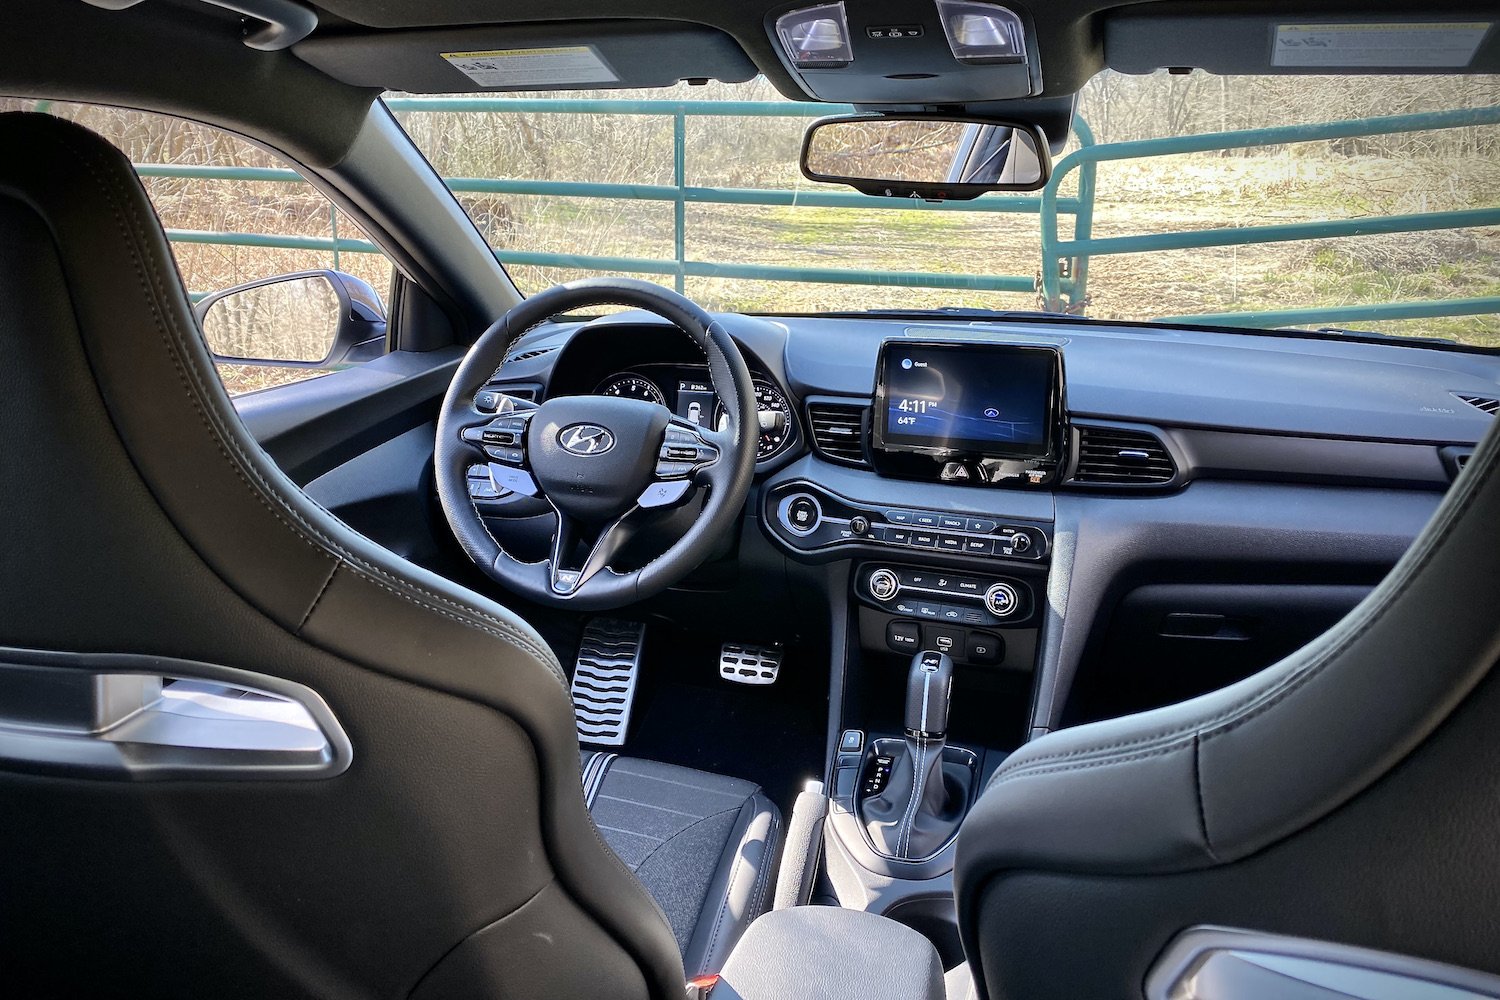 Hyundai Veloster N dashboard from the back seats with a fence in the background.